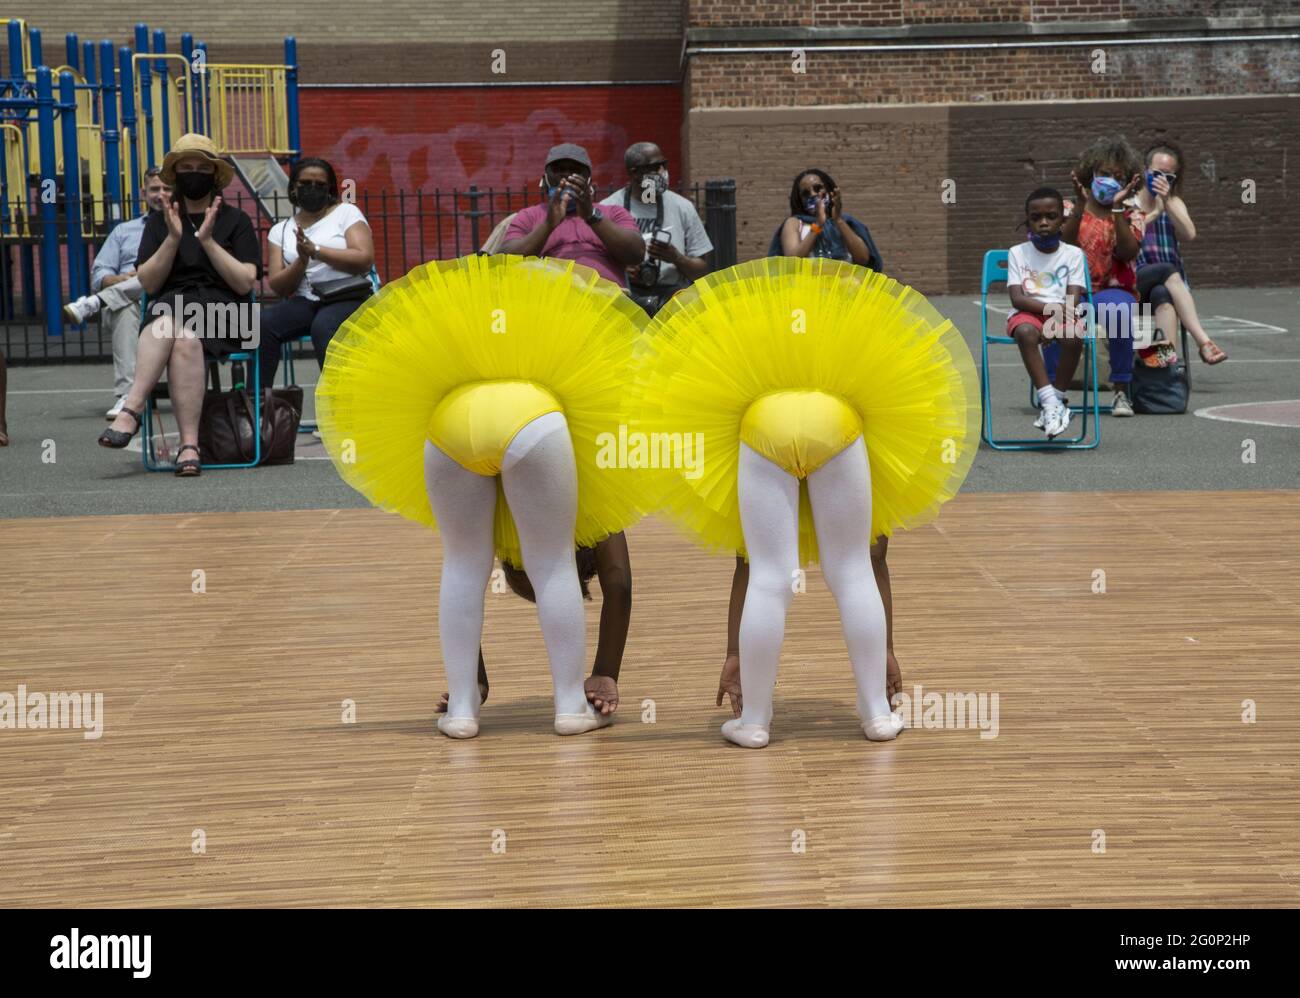 Cynthia KIng Dance Studio for kids in Brooklyn, New York holds its first performance outdoors, with masks and social distancing in the spring 2021 since the pandemic and city shutdown began over a year earlier. Stock Photo